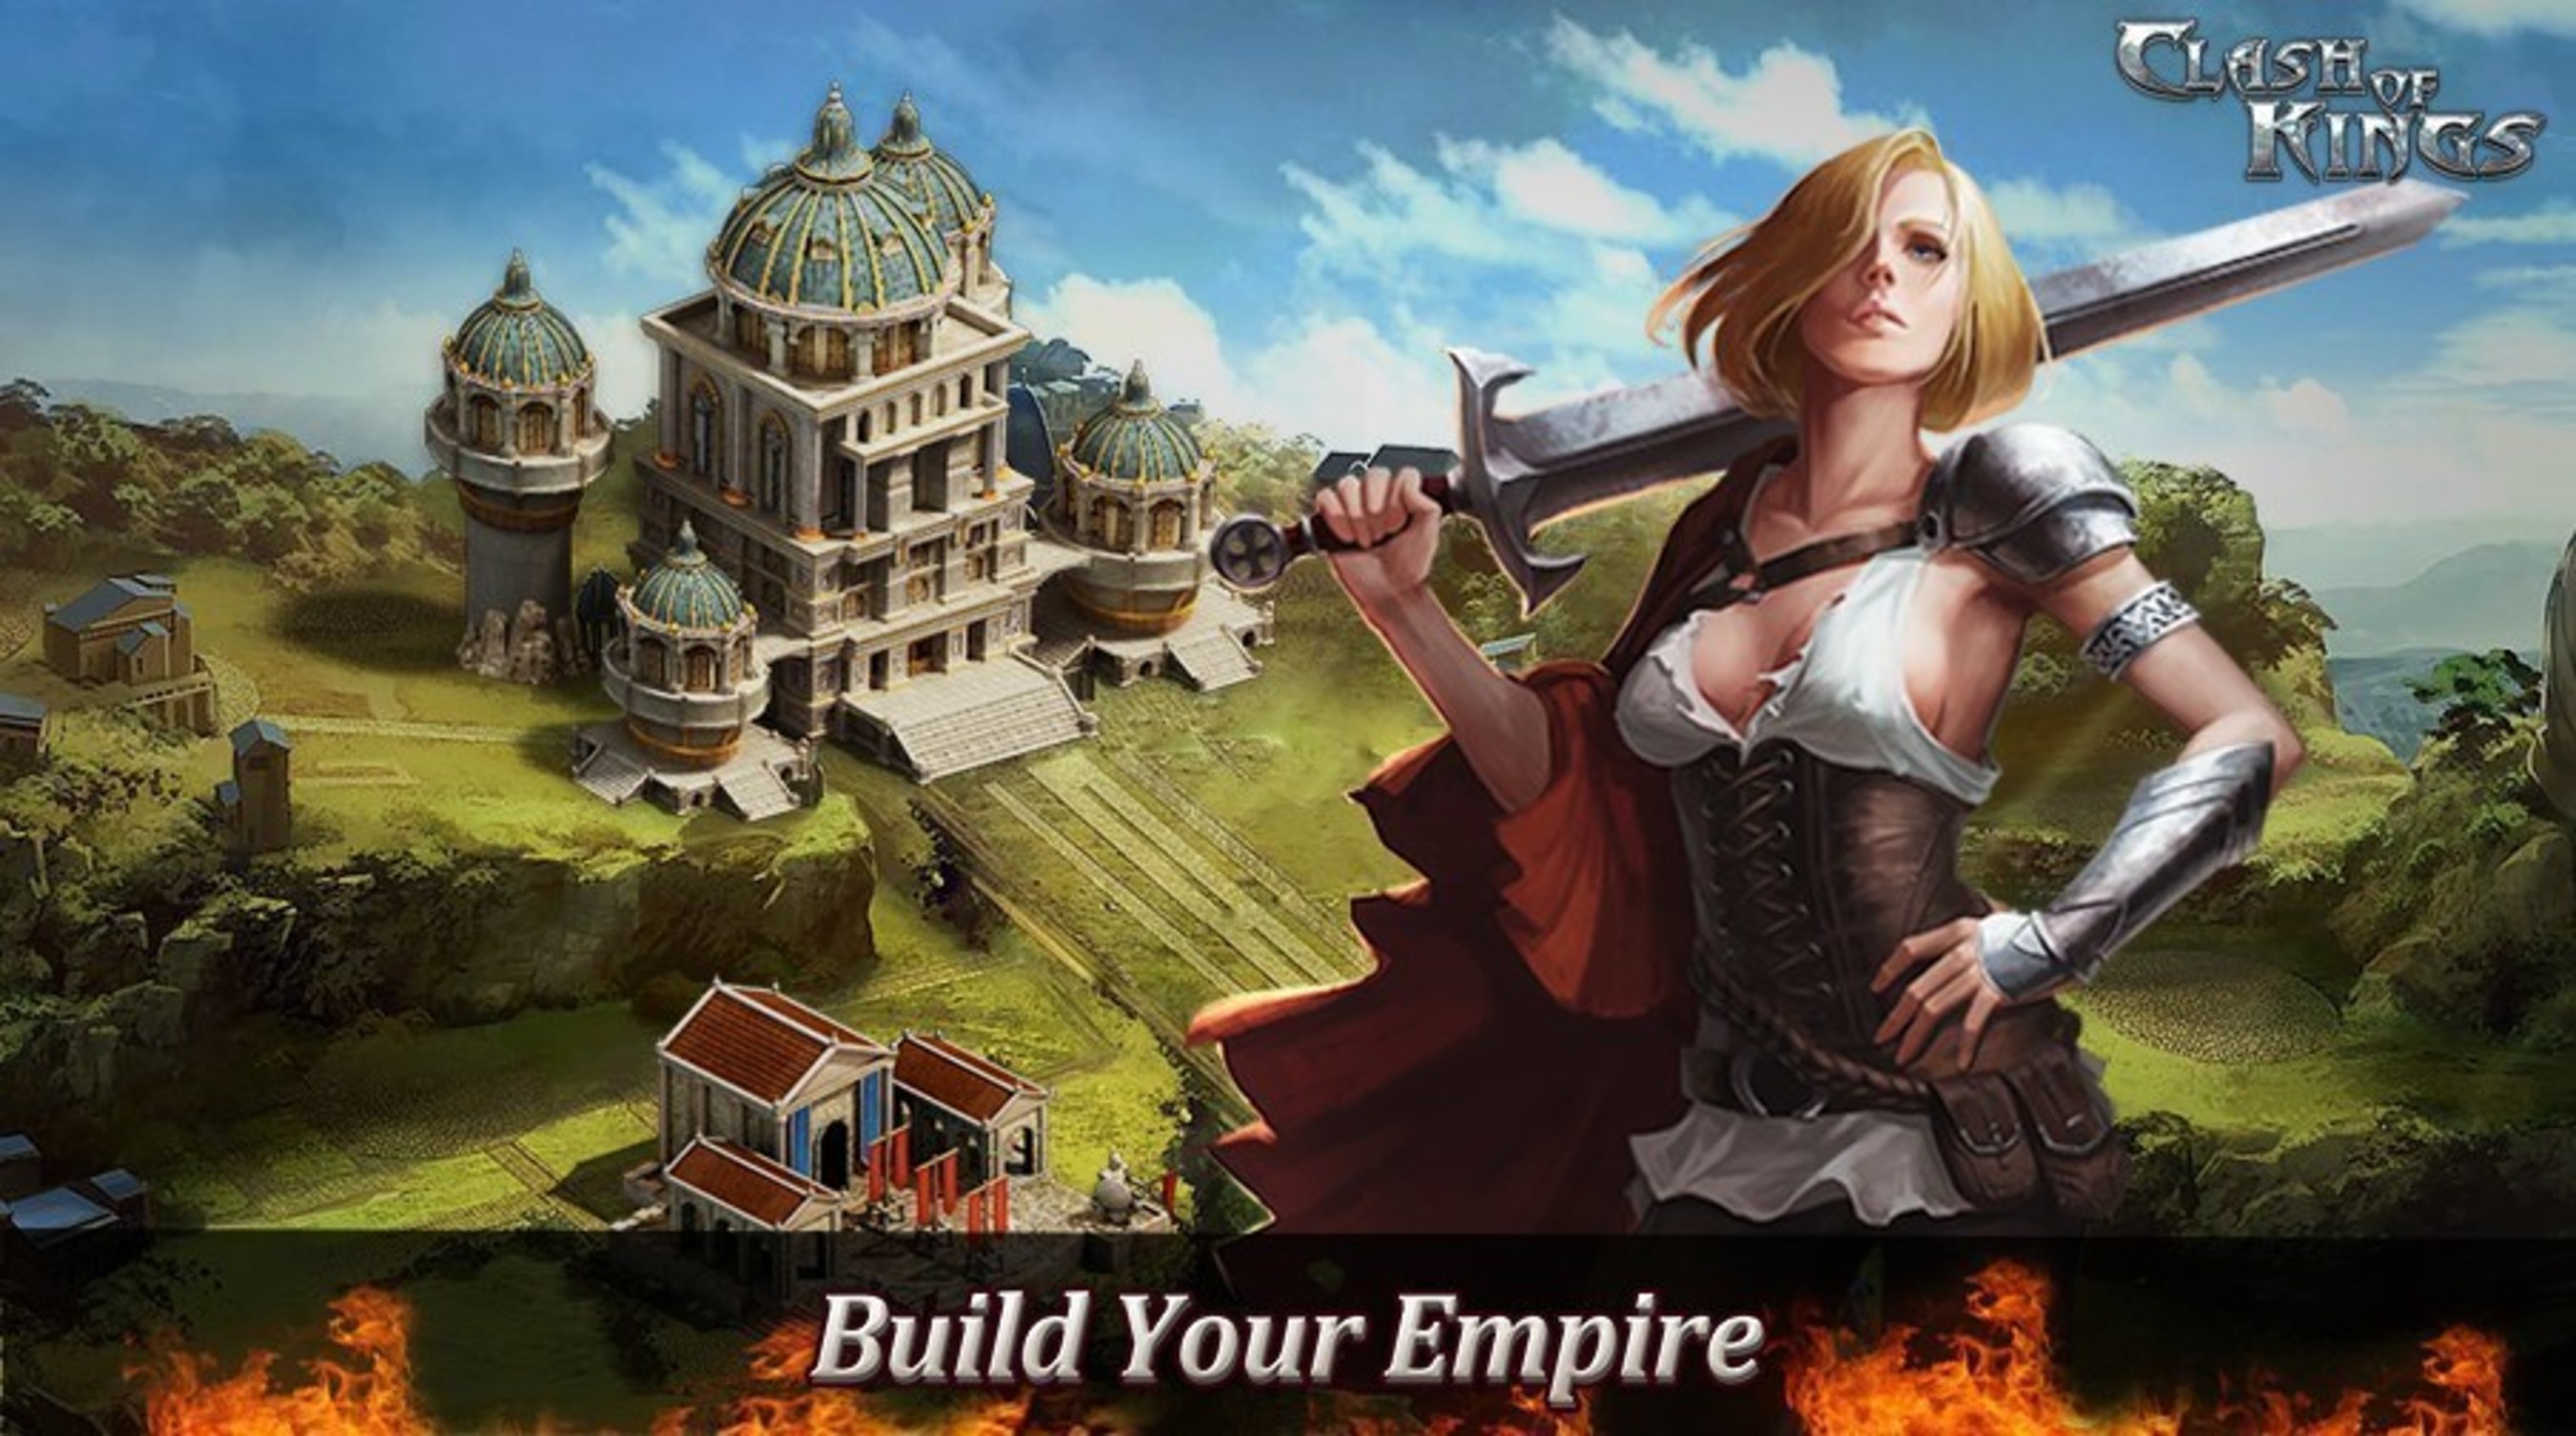 Clash of Kings has Reached over 70 million Downloads and 1,000